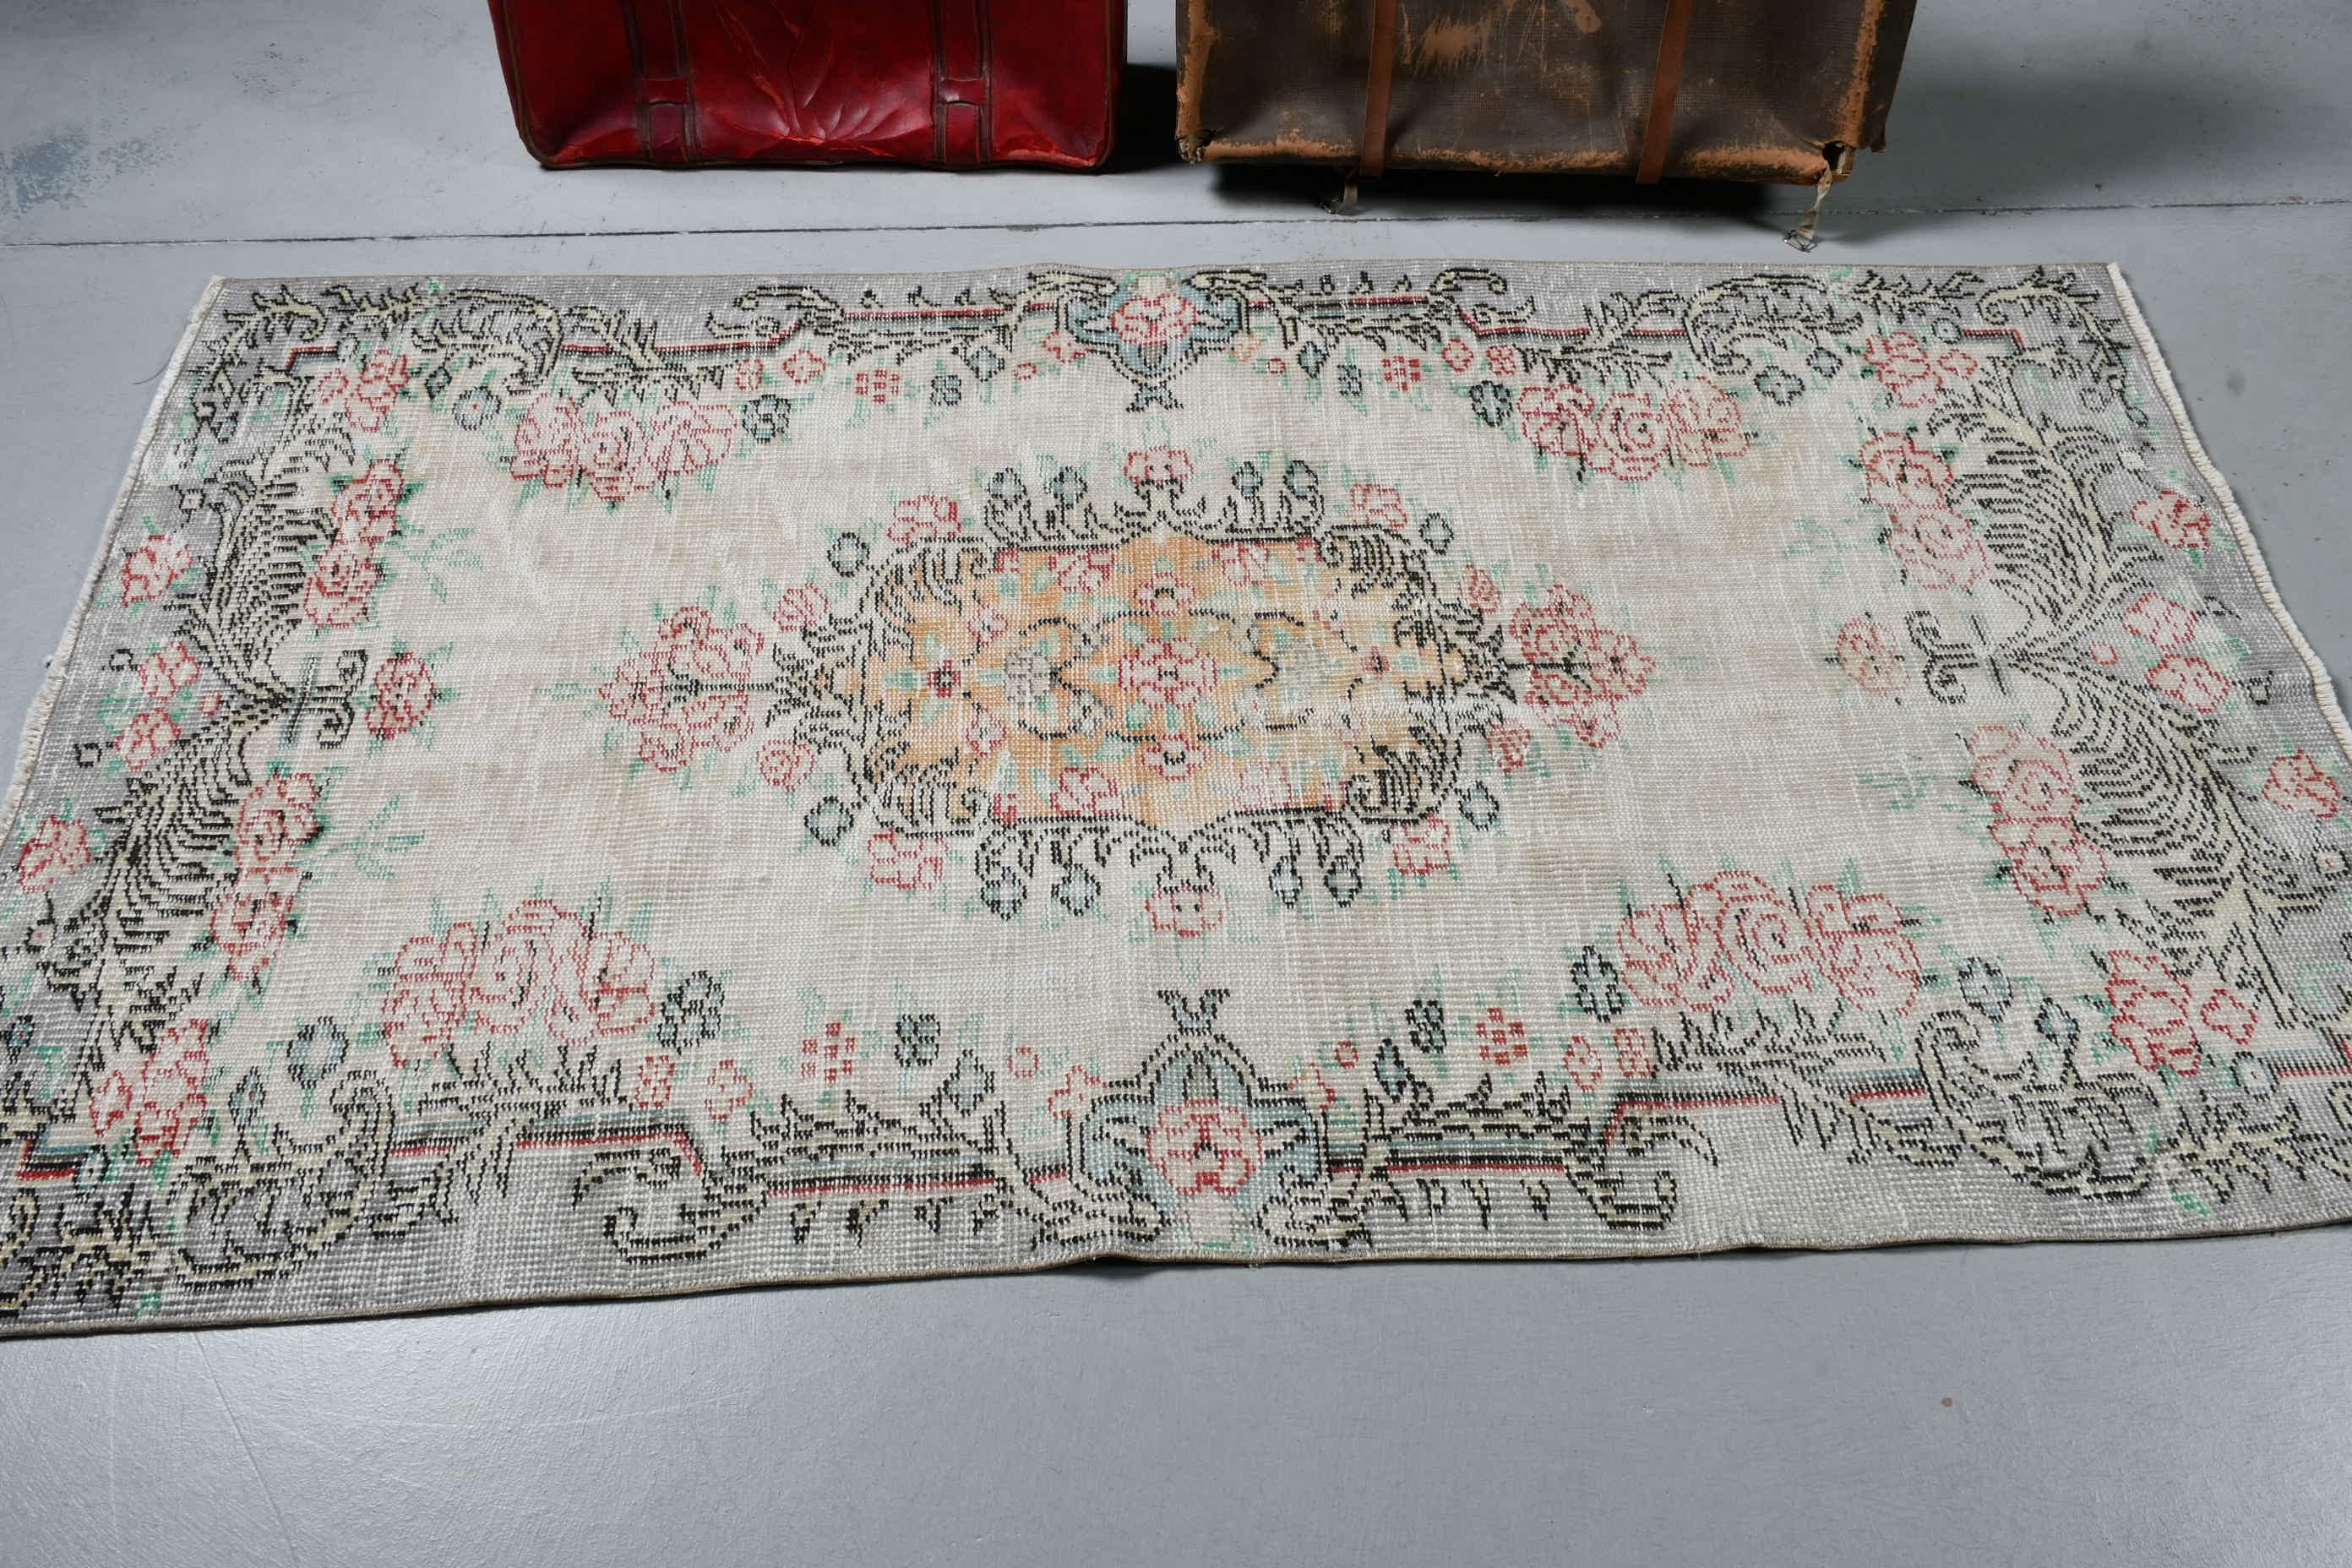 Vintage Rug, Beige Wool Rug, 3.6x6.3 ft Accent Rug, Entry Rug, Anatolian Rug, Turkish Rugs, Bedroom Rug, Moroccan Rugs, Rugs for Kitchen